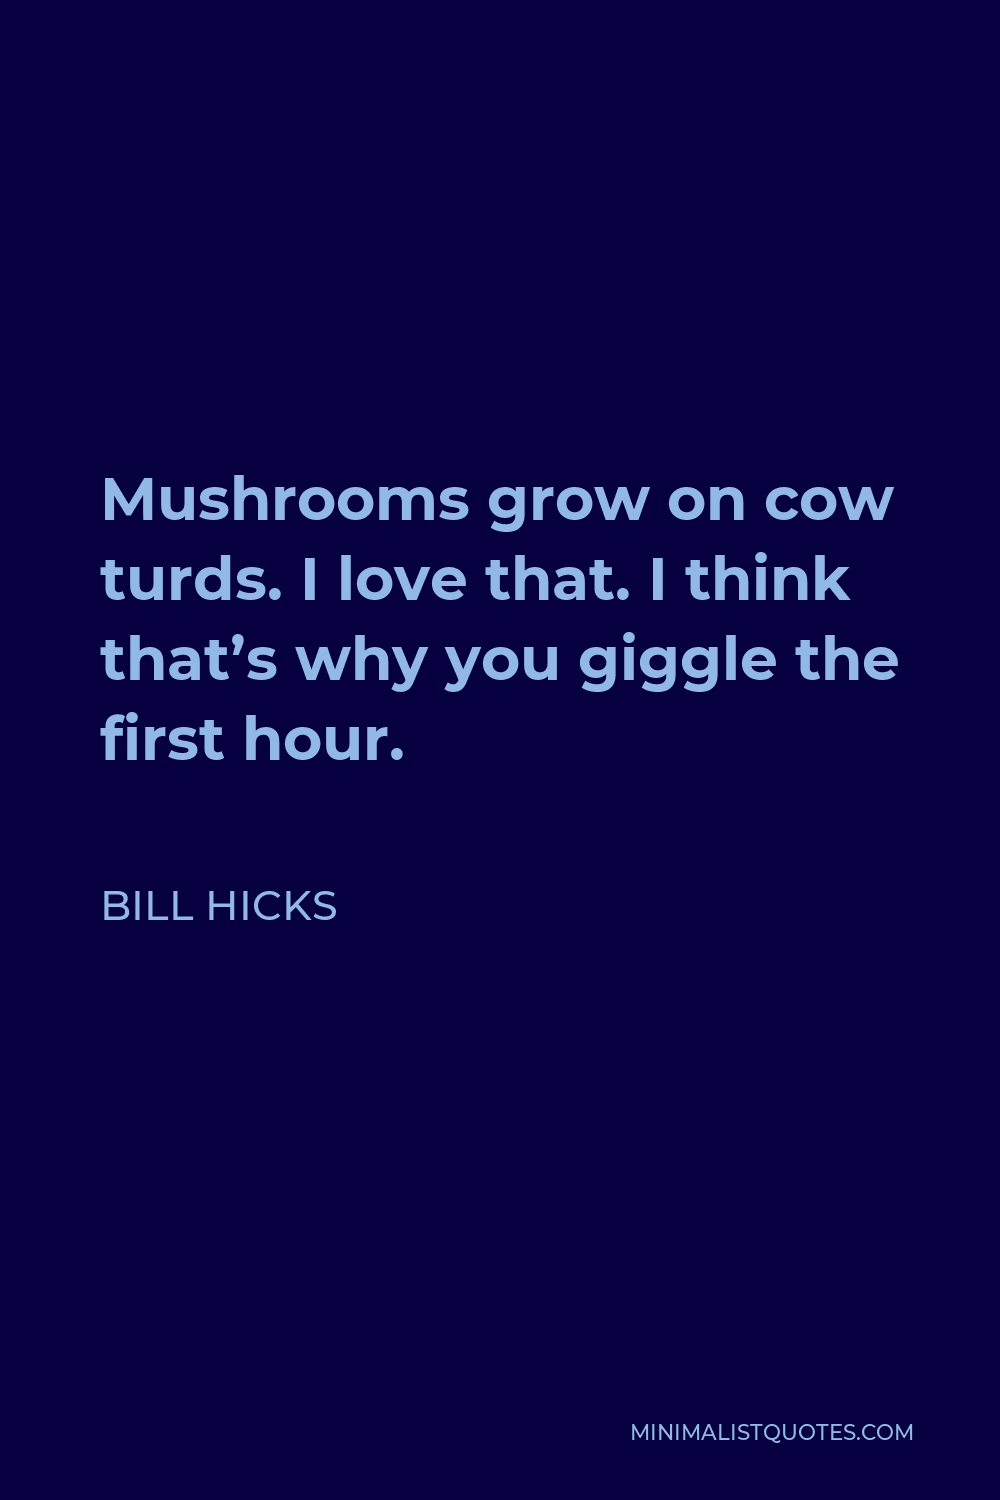 Bill Hicks Quote - Mushrooms grow on cow turds. I love that. I think that’s why you giggle the first hour.